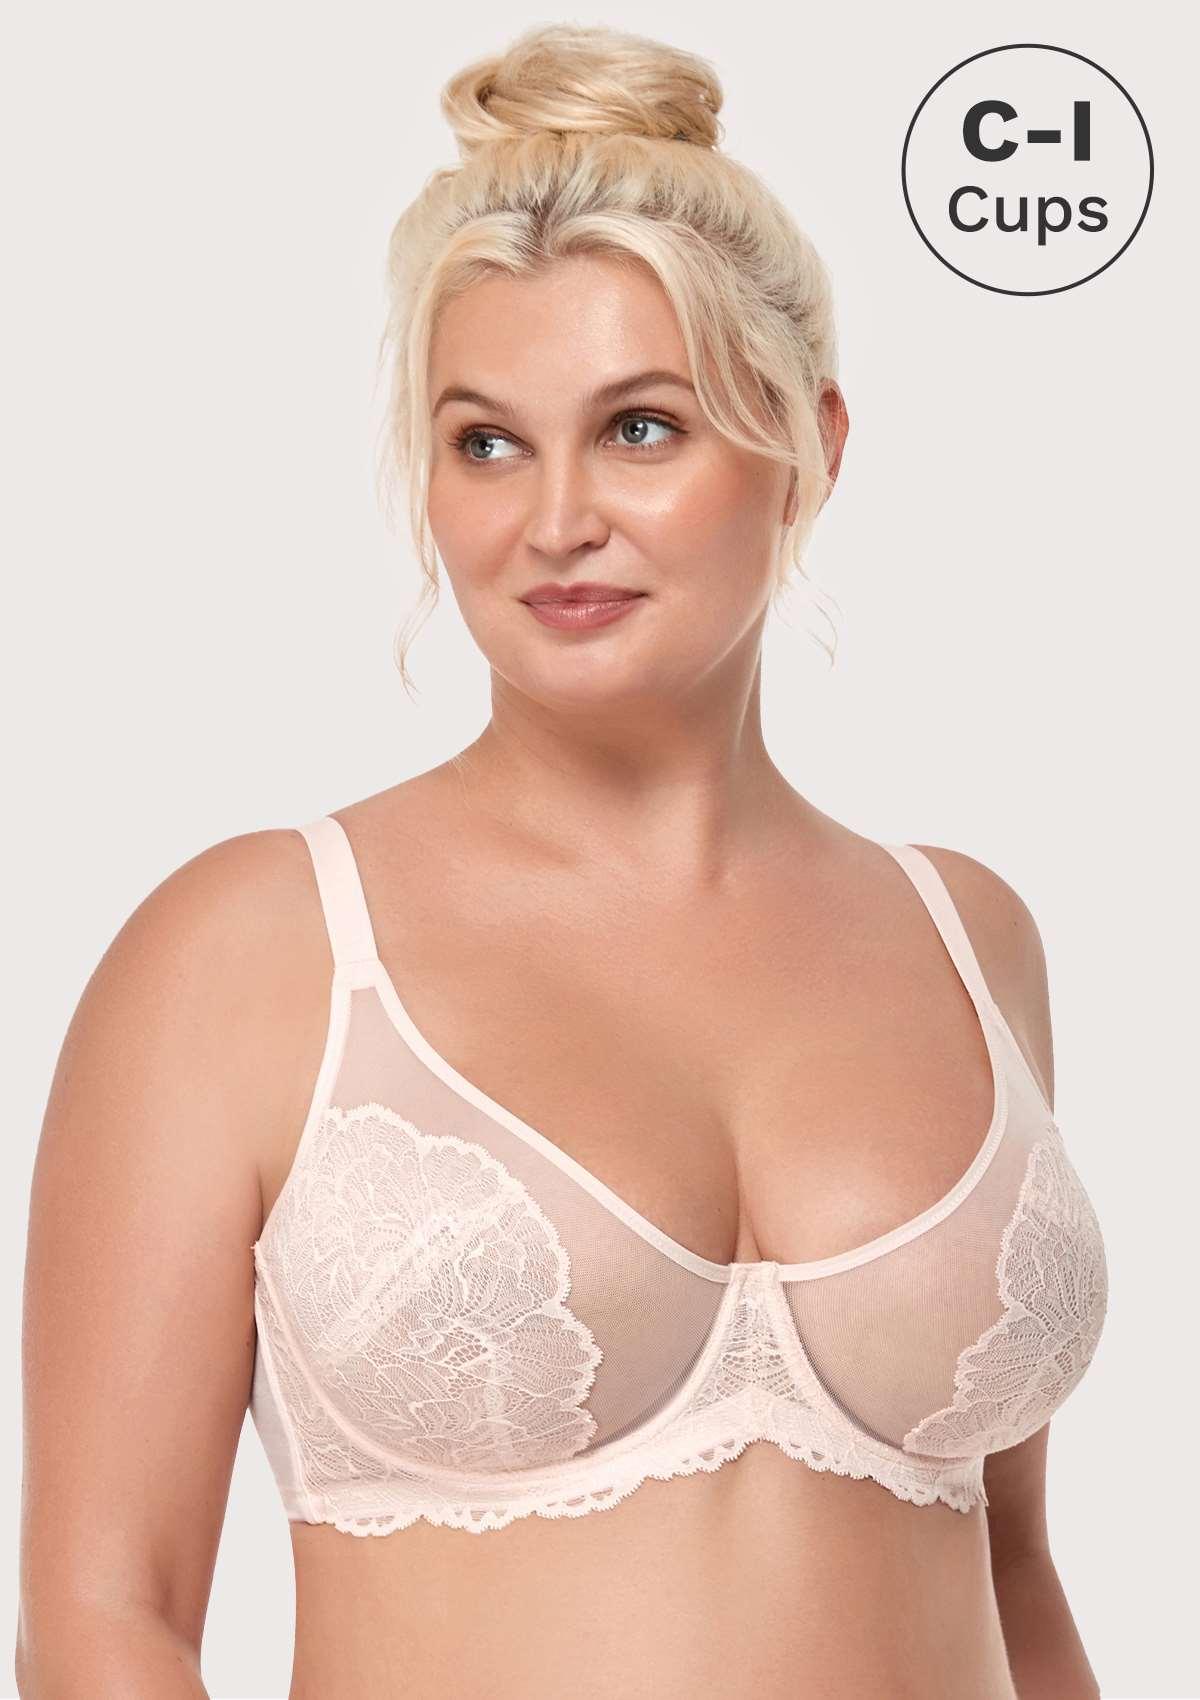 HSIA Blossom Matching Lacey Underwear And Bra Set: Sexy Lace Bra - Dusty Peach / 34 / C